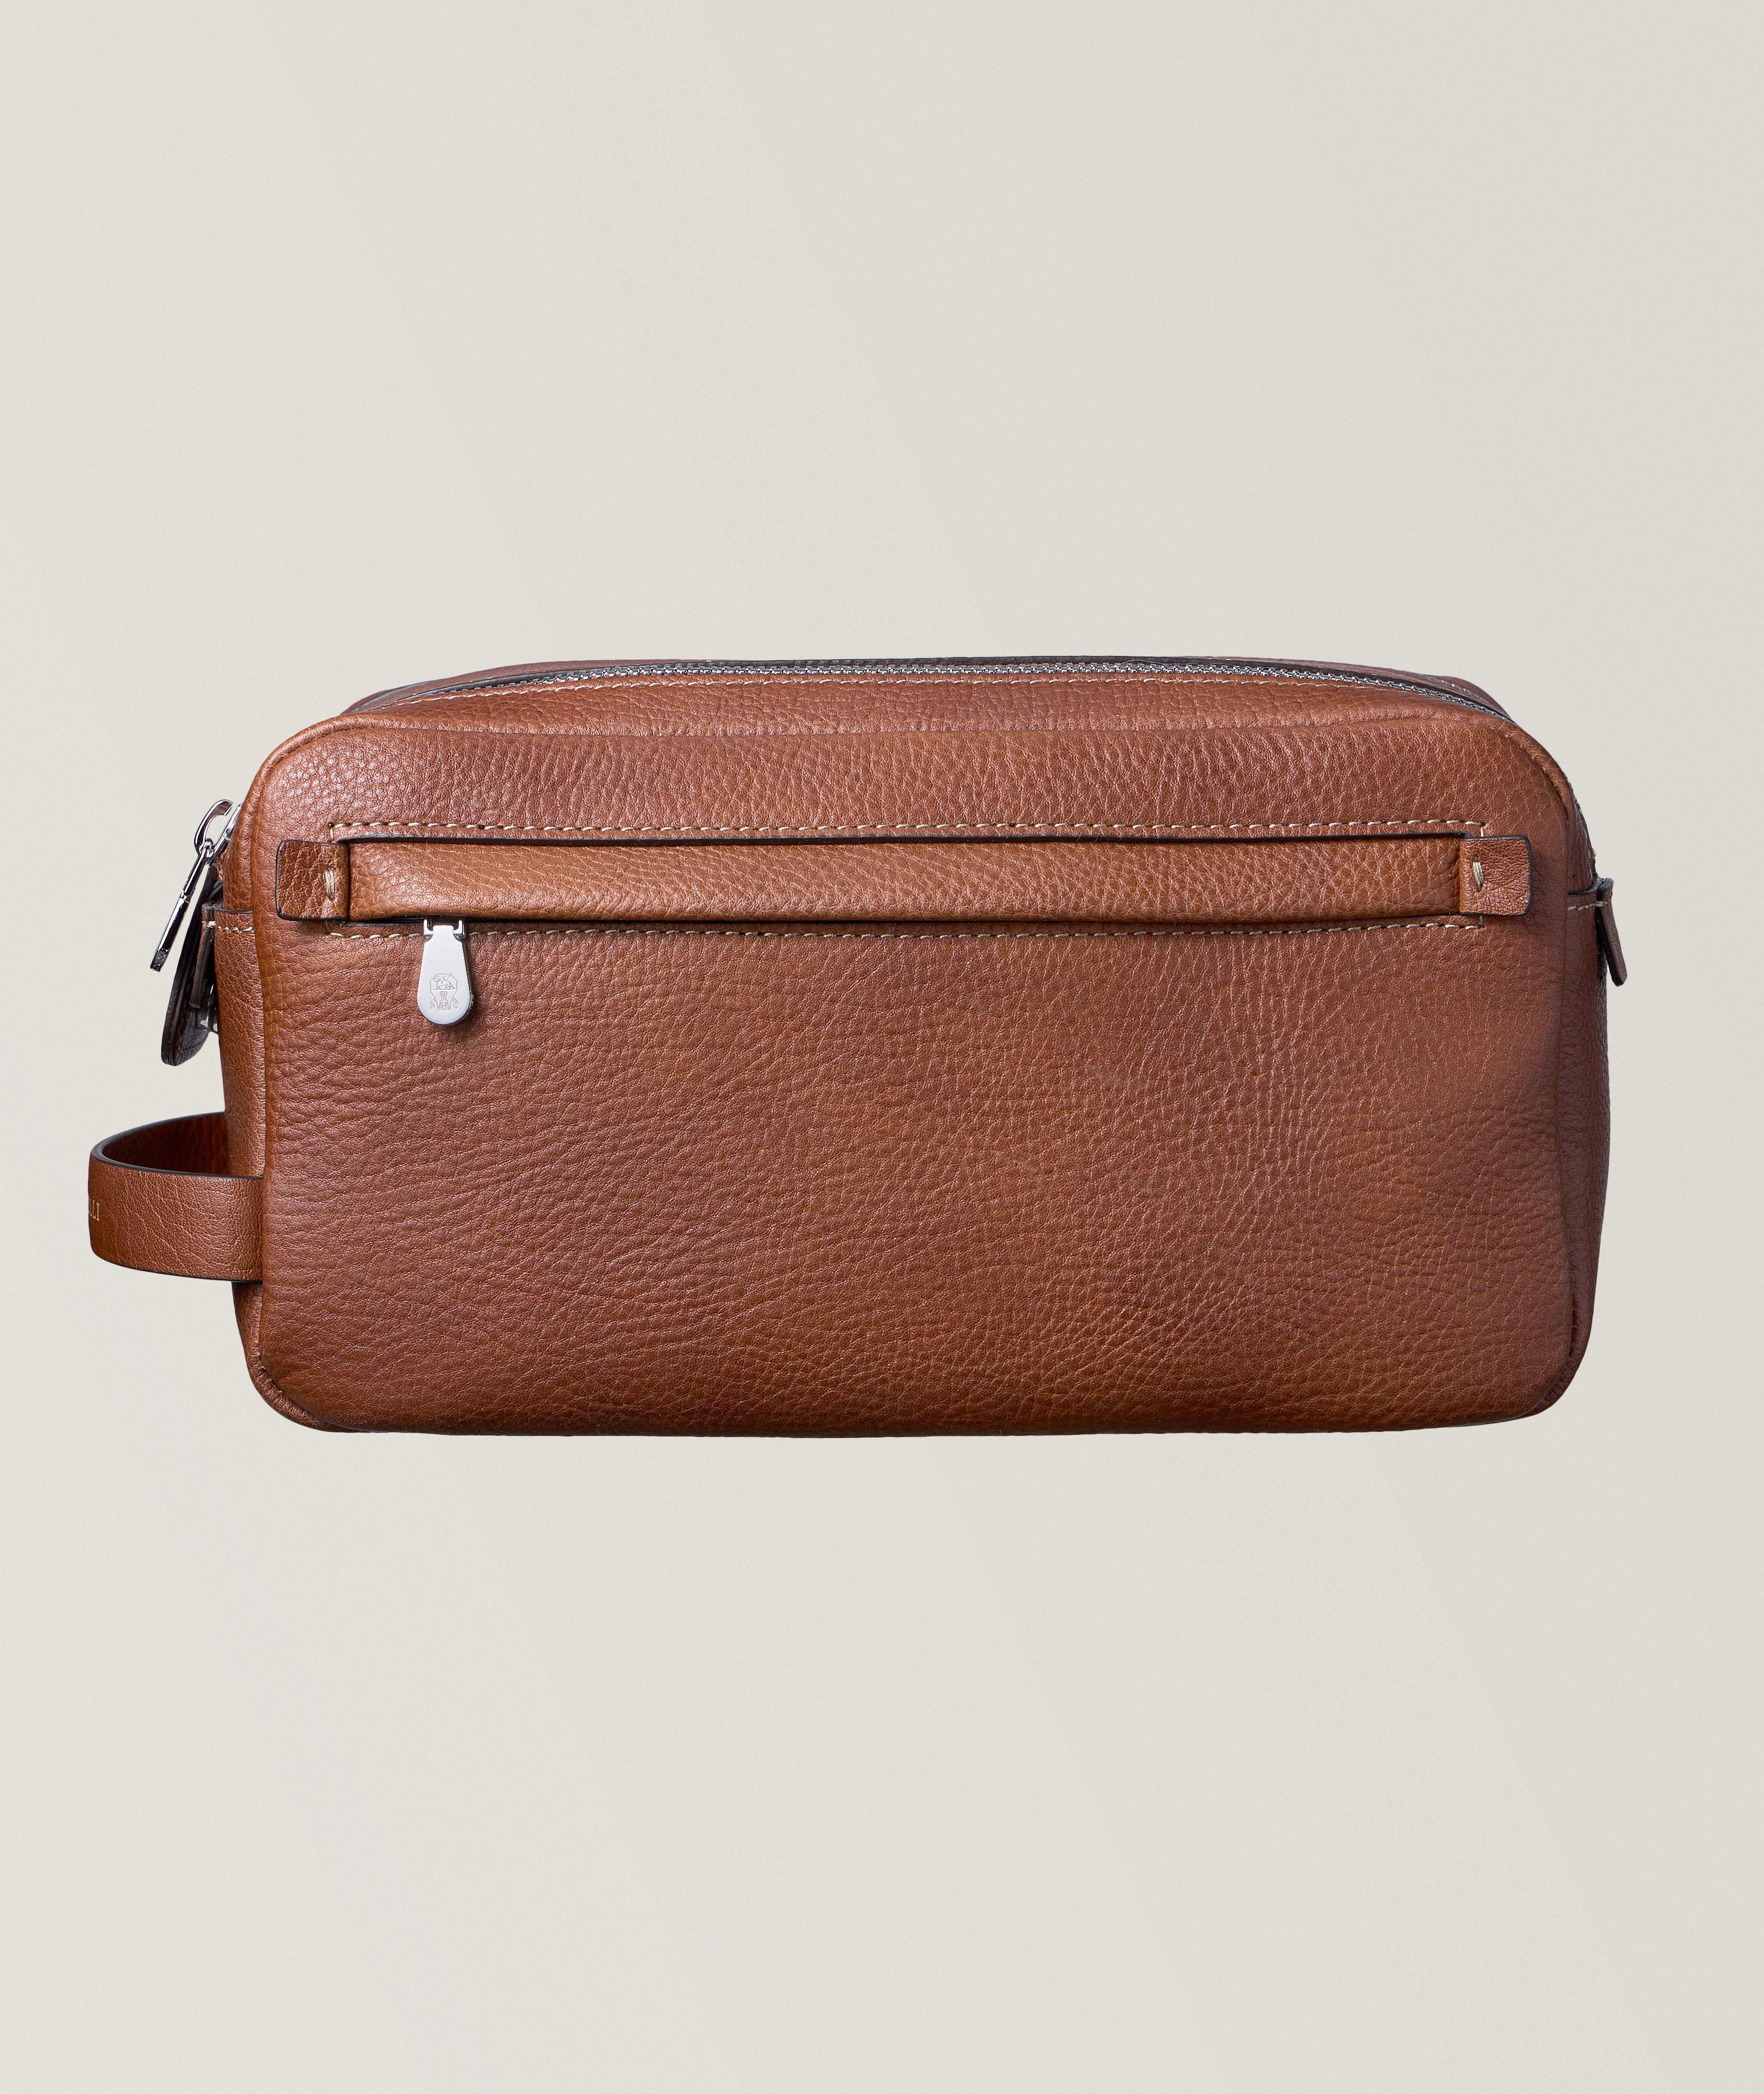 Grain Leather Toiletry Bag image 0